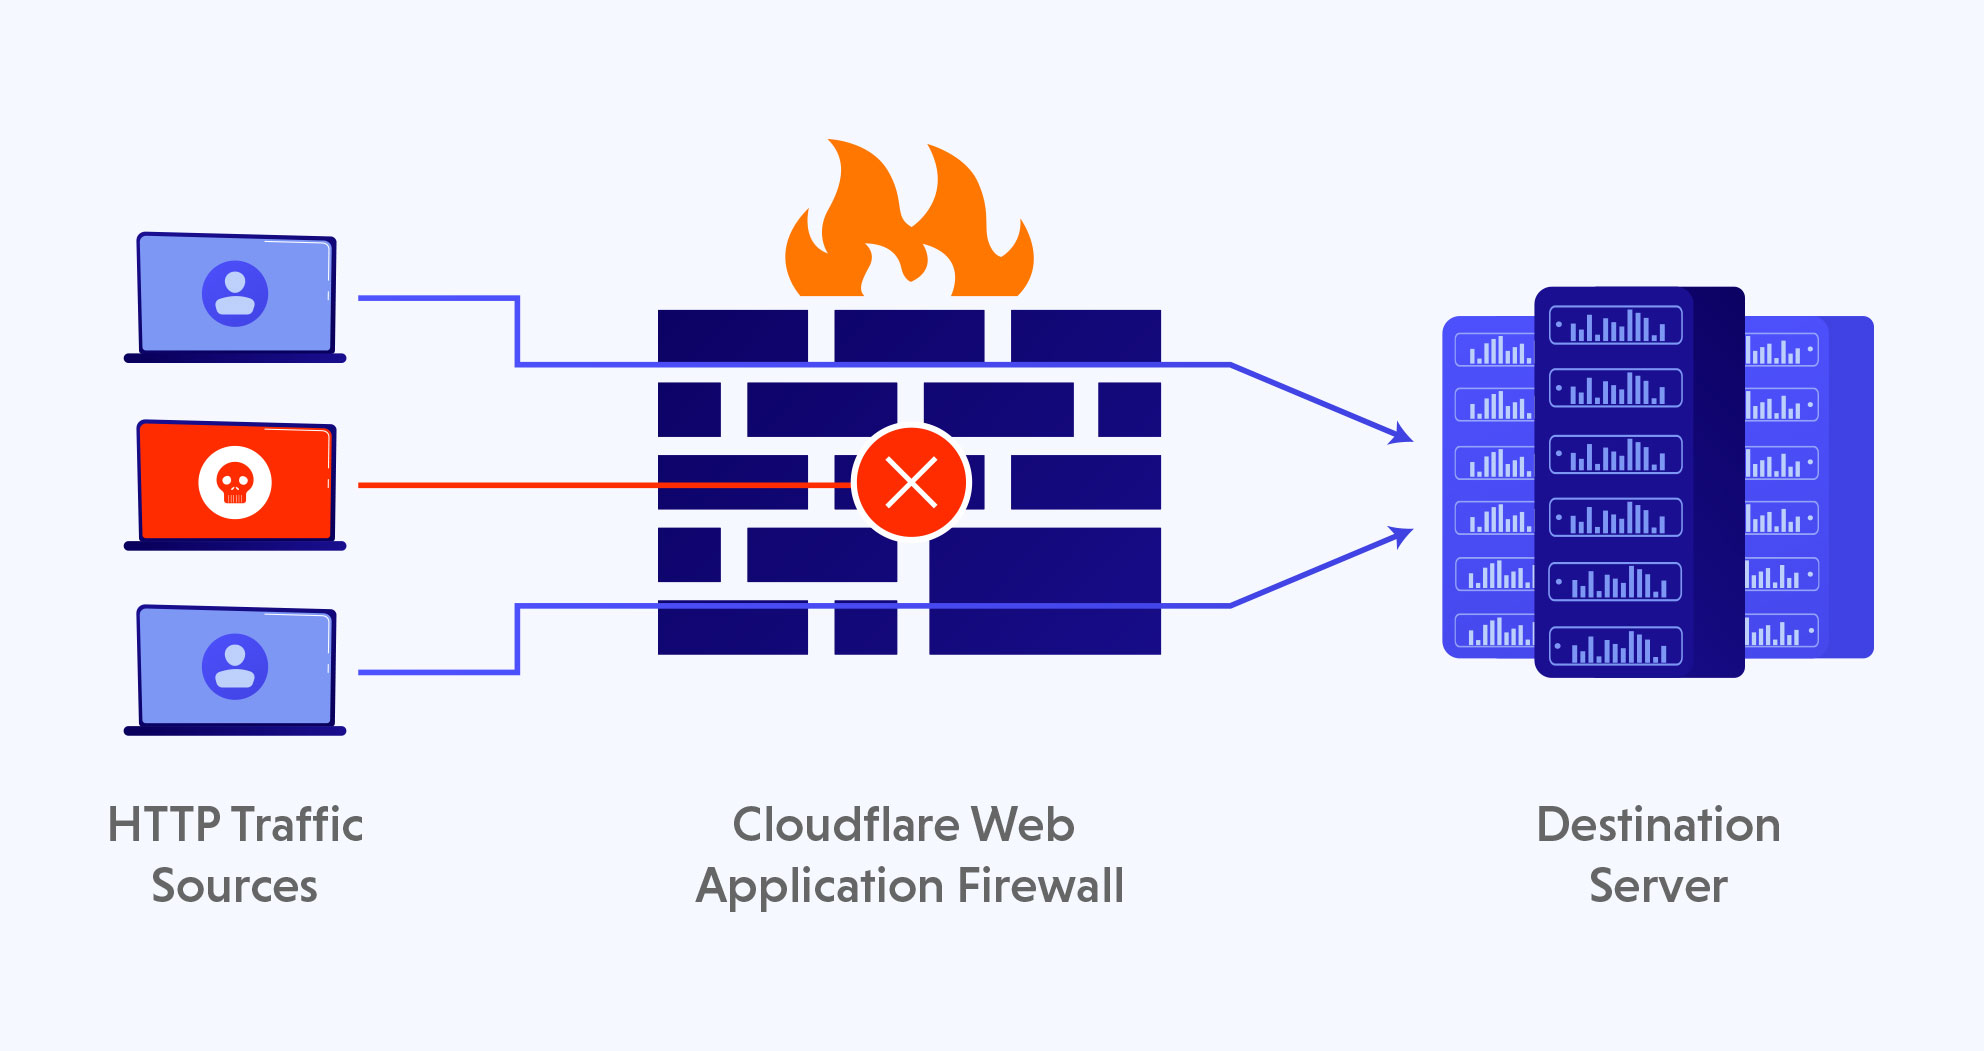 Designing the new Cloudflare Web Application Firewall